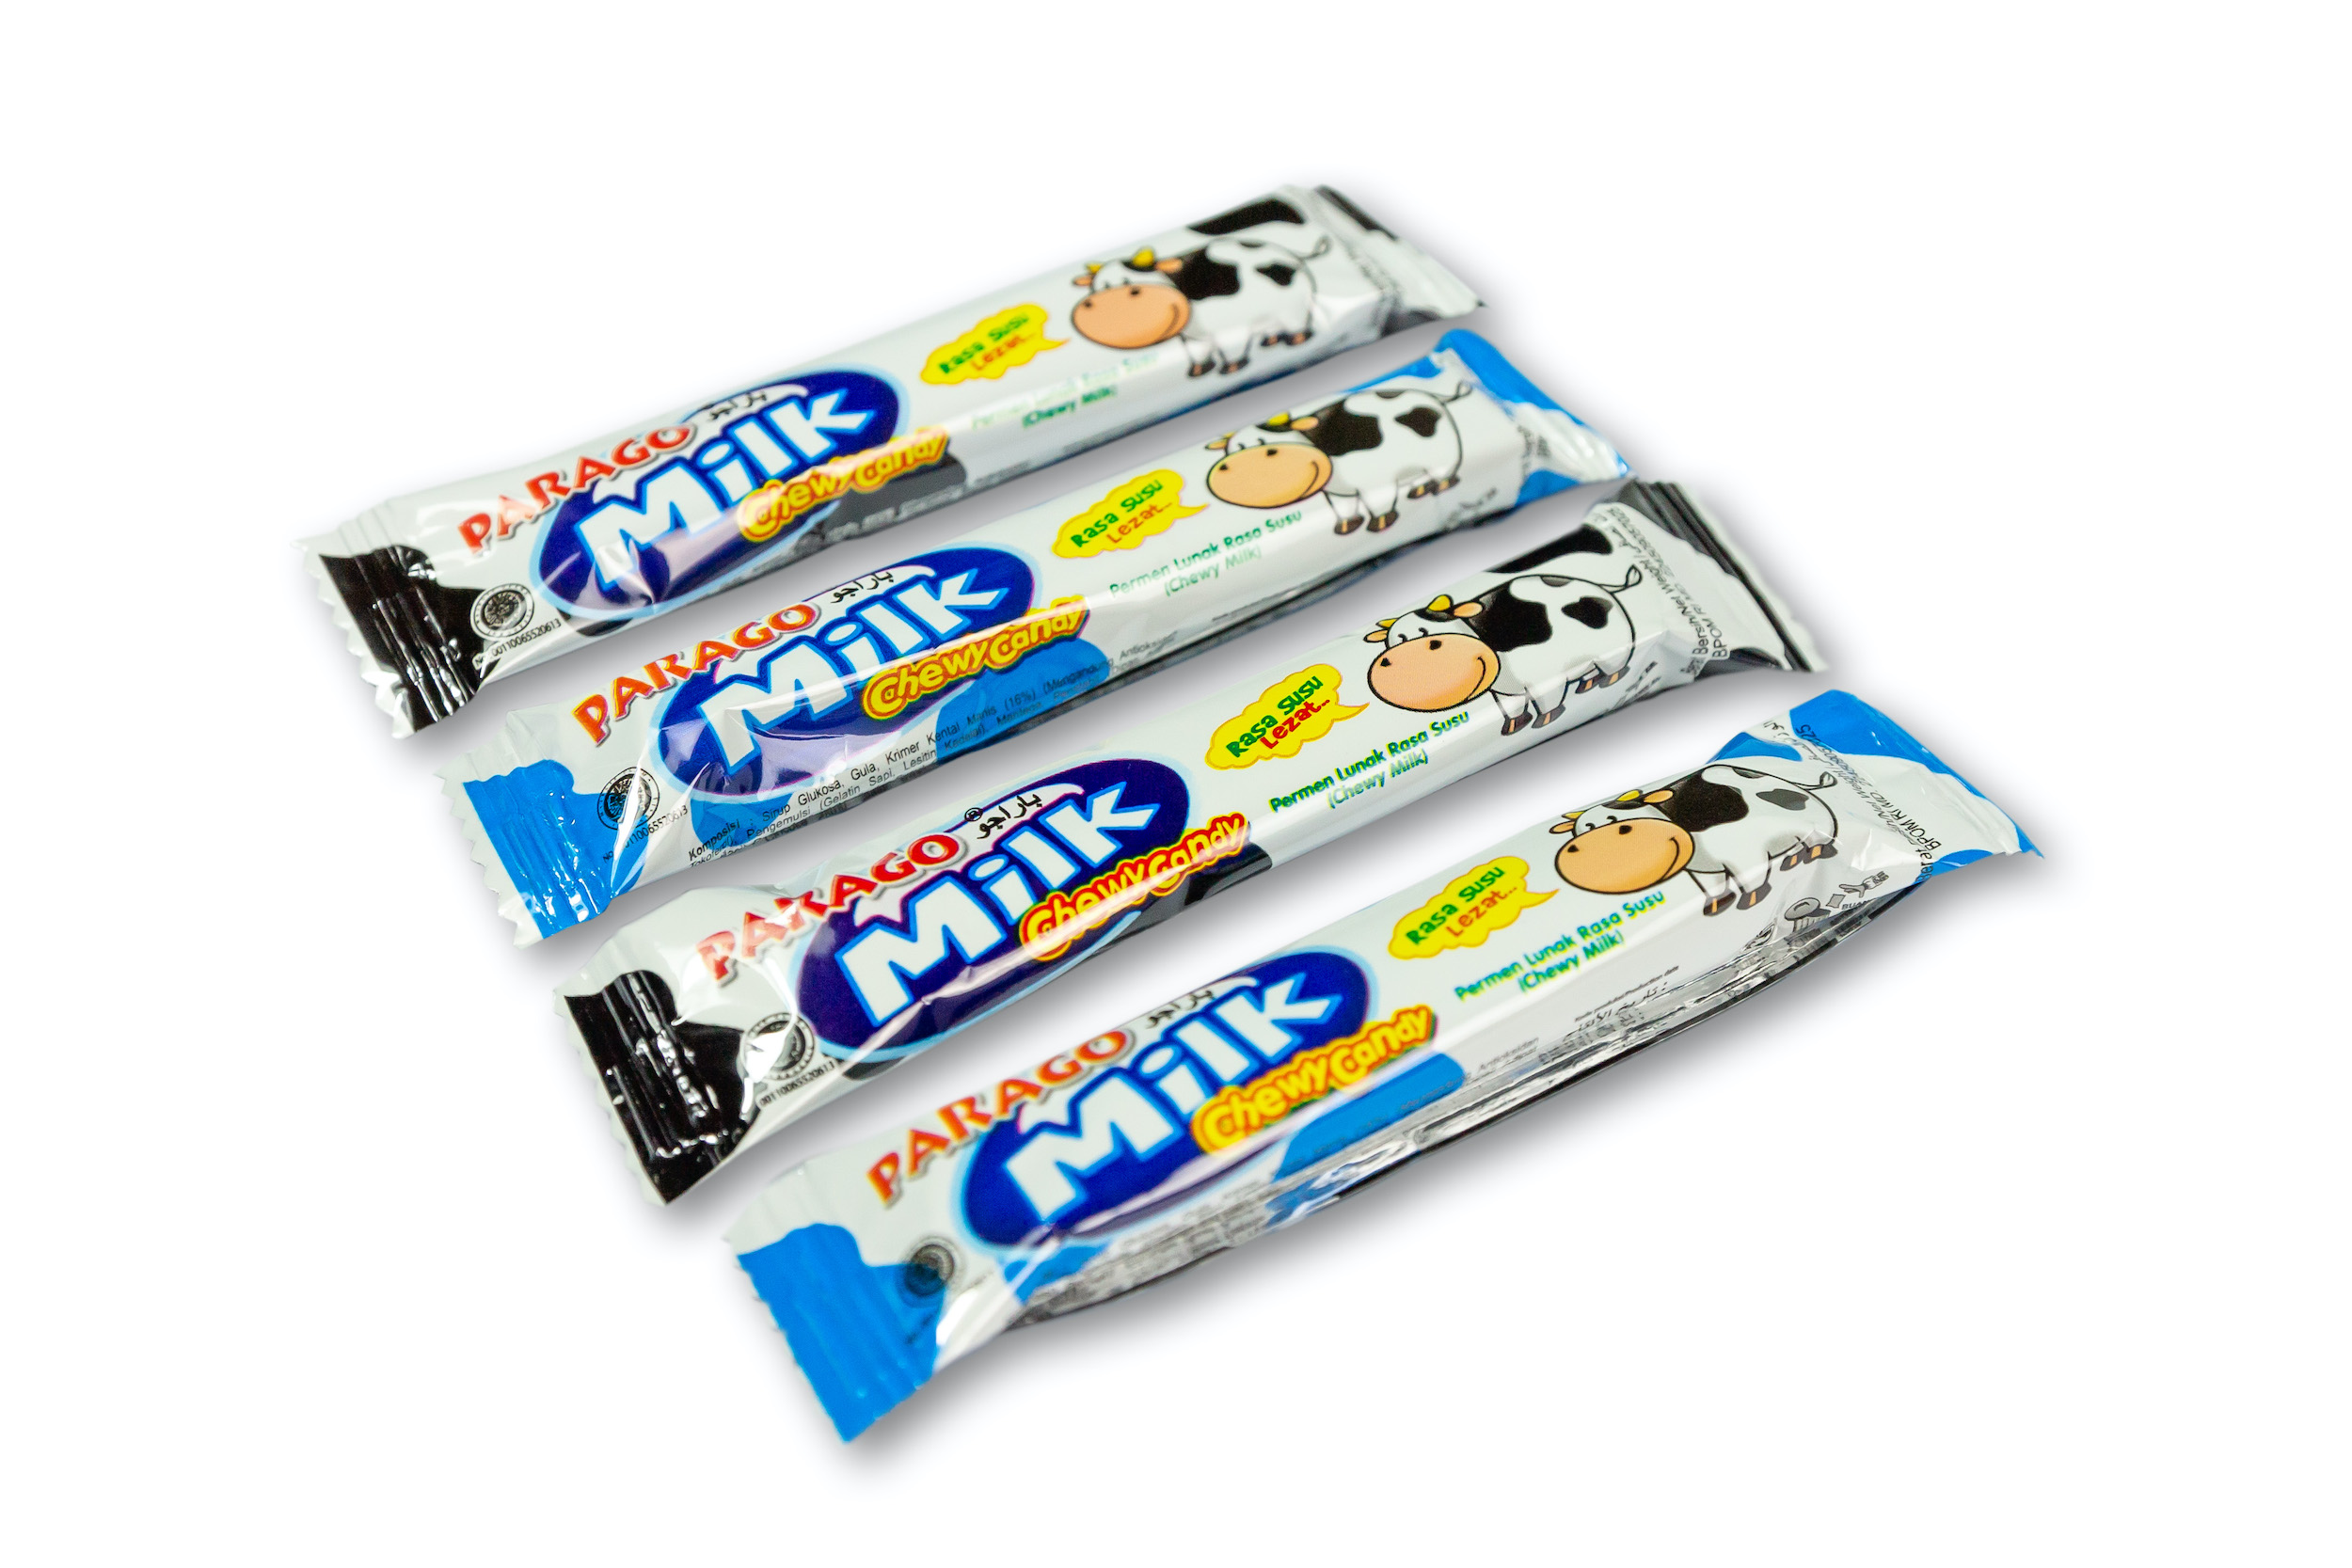 A Melt-in-Your-Mouth-and-Heart Nostalgic Milk Candy…   Parago Chewy Milk is a high concentrated milk candy with an intensely sweet, milky flavour and a creamy, gummy texture that will instantly melt in your mouth and warm your heart. A popular and a renowned type of sweet in Indonesia, this delicious candy is made with carefully selected, high quality imported pure milk powder, enriched by real butter to give it a full-bodied milky flavour with a high nutritional value (source of protein and calcium) from our in-house sweetened condense milk.    Parago Chewy Milk is a perfect fit as a delicious and healthy snack for school or work, family picnic, parties, movie companion, gift for your loved ones, or something to bring along during your escapades! One is never enough, as its sumptuous smooth texture combined with scrumptious taste has been proven to be too strong to resist. Indulge in a milky adventure with this classic, nostalgic candy which will bring so much joy to your day!   Parago Chewy Milk candy is manufactured with modern machinery which ensures a perfect blend of ingredients and provides a chewy consistency, while also following the hygiene and food safety protocol. It is visually appealing with a simple yet modern and attractive packaging, featuring an adorable cow spot pattern with a vibrant white and blue colour scheme, making it stand out and easily recognisable in the retail market.    Parago Chewy Milk is manufactured by PT. Internusa Food, a modern and innovative confectionery and candy manufacturer in Indonesia with longstanding tradition of excellence. Competitively-priced to cater the middle-low market segments, PT. Internusa Food has produced well-known brands loved by the Indonesian customers and overseas markets over the years. The Company’s products have been exported to many countries in Southeast Asia, Asia Pacific, U.S.A, the Middle East and Africa. Its high-quality products follows the ISO 22000:2005 Food Safety Management System and the Indonesian Food and Drug Monitoring Agency (BPOM). All products are also Halal-certified by Indonesian Ulama Council (MUI). Parago Chewy Milk is available for bulk purchasing with B2B wholesale price.   Package content: - 8boxes @80pcs @8g - 20boxes @80pcs @8g - 20boxes @80pcs @7g - 20boxes @80pcs @6g - 12boxes @40pcs @8g - 20bags @250g @8g -10 bags @350pcs @3g - 50bags @60g @3g